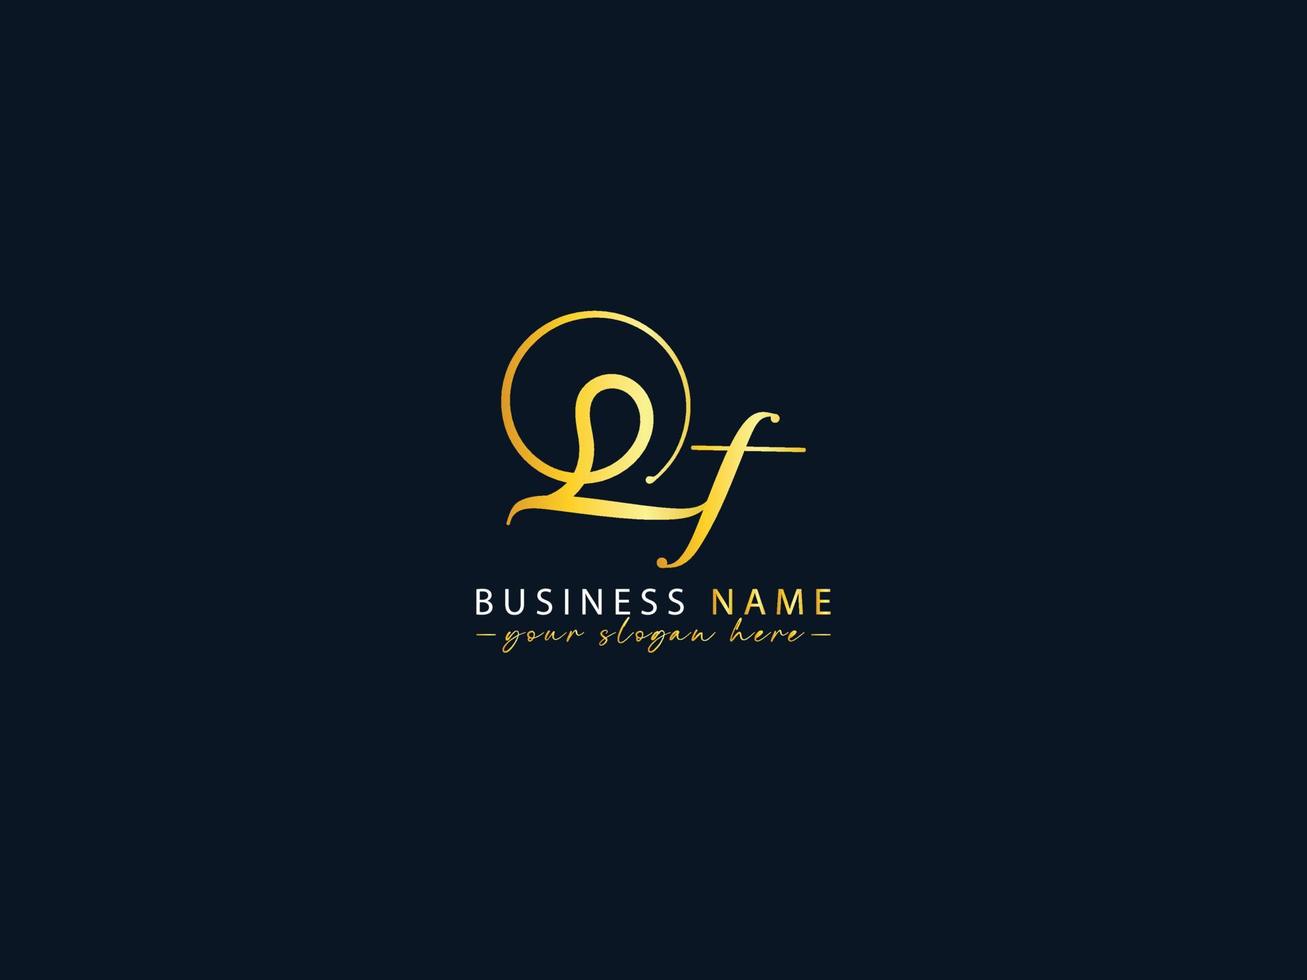 Luxury Qf Logo Letter, Calligraphy qf Letter Logo Vector